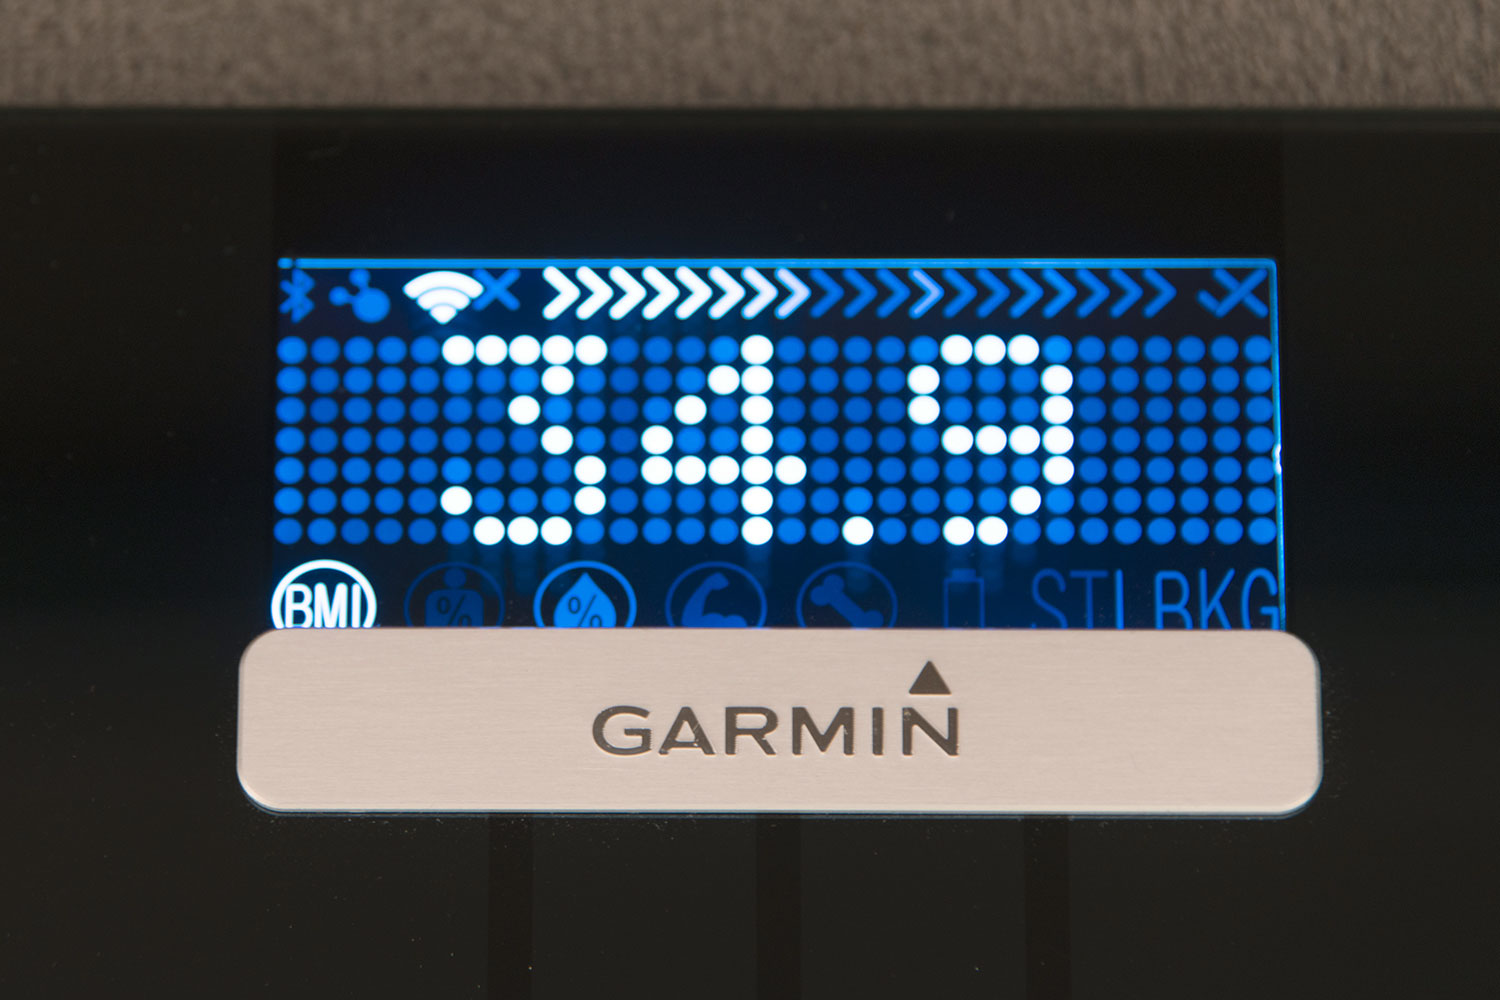 Garmin Index Smart Scale - Getting Started with a Connected Scale